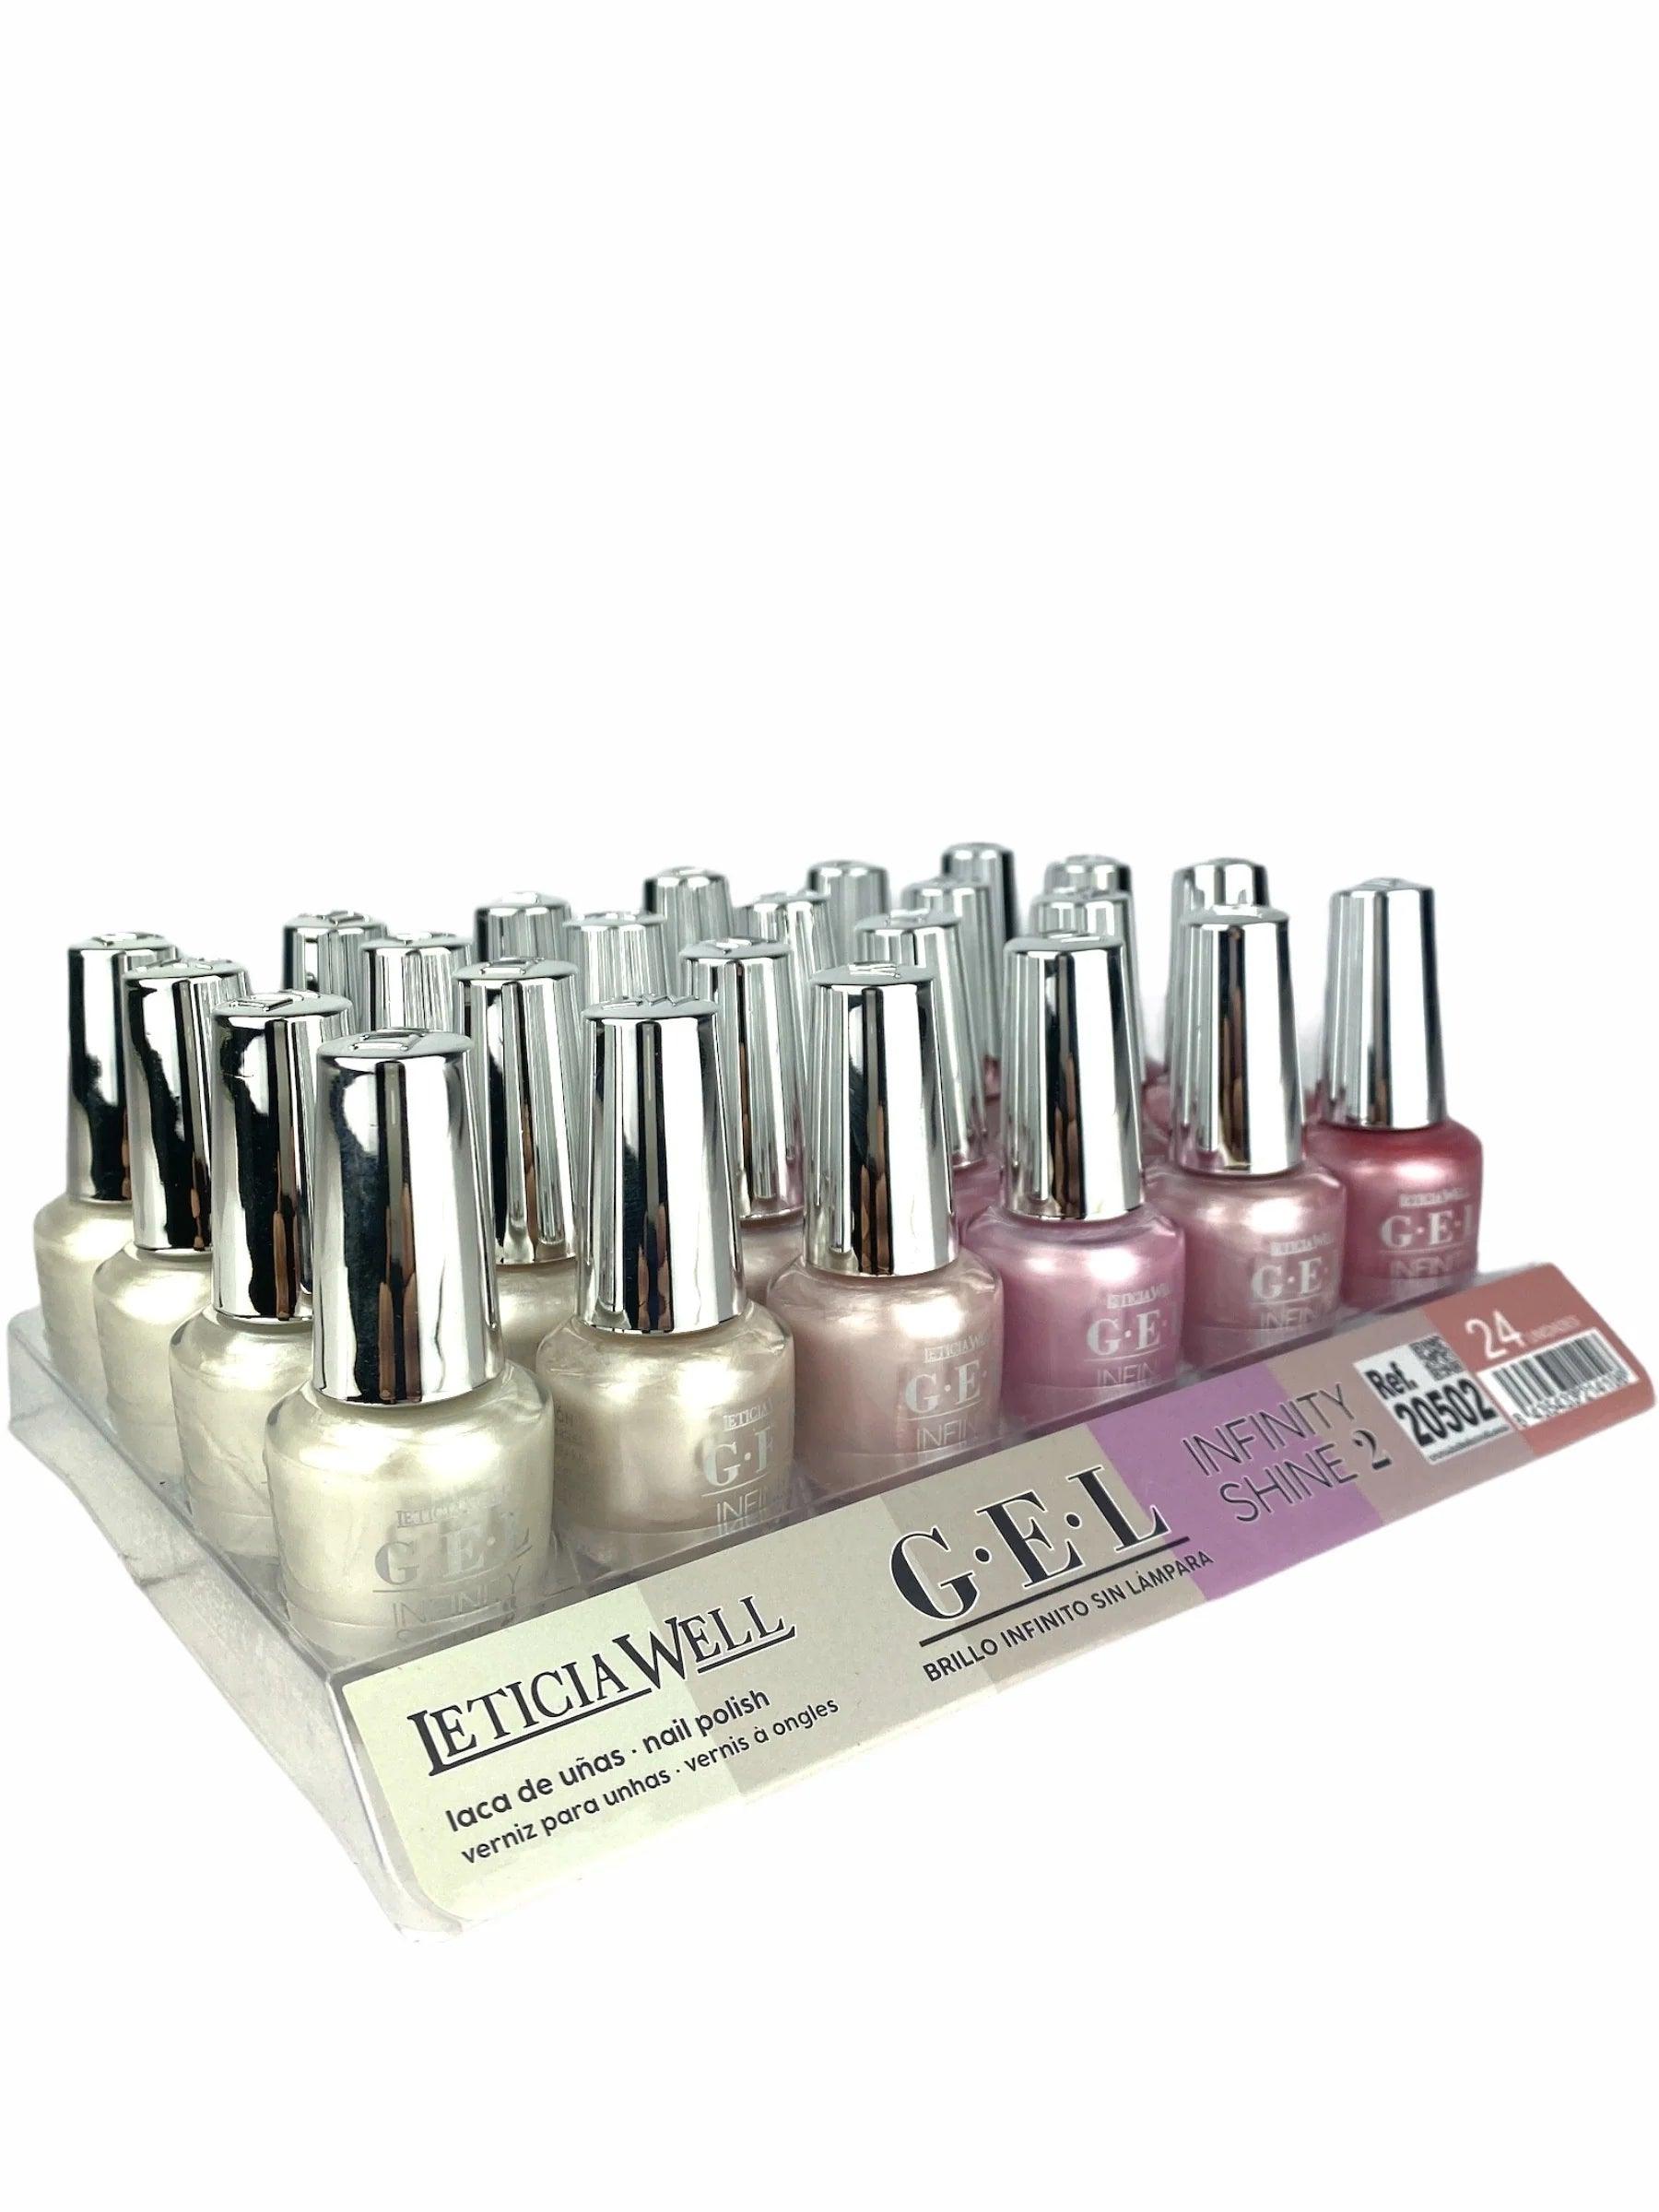 PACK DE 24 VERNIS A ONGLES G·E·L "Infinity Shine2" - LETICIA WELL - idc institute en gros